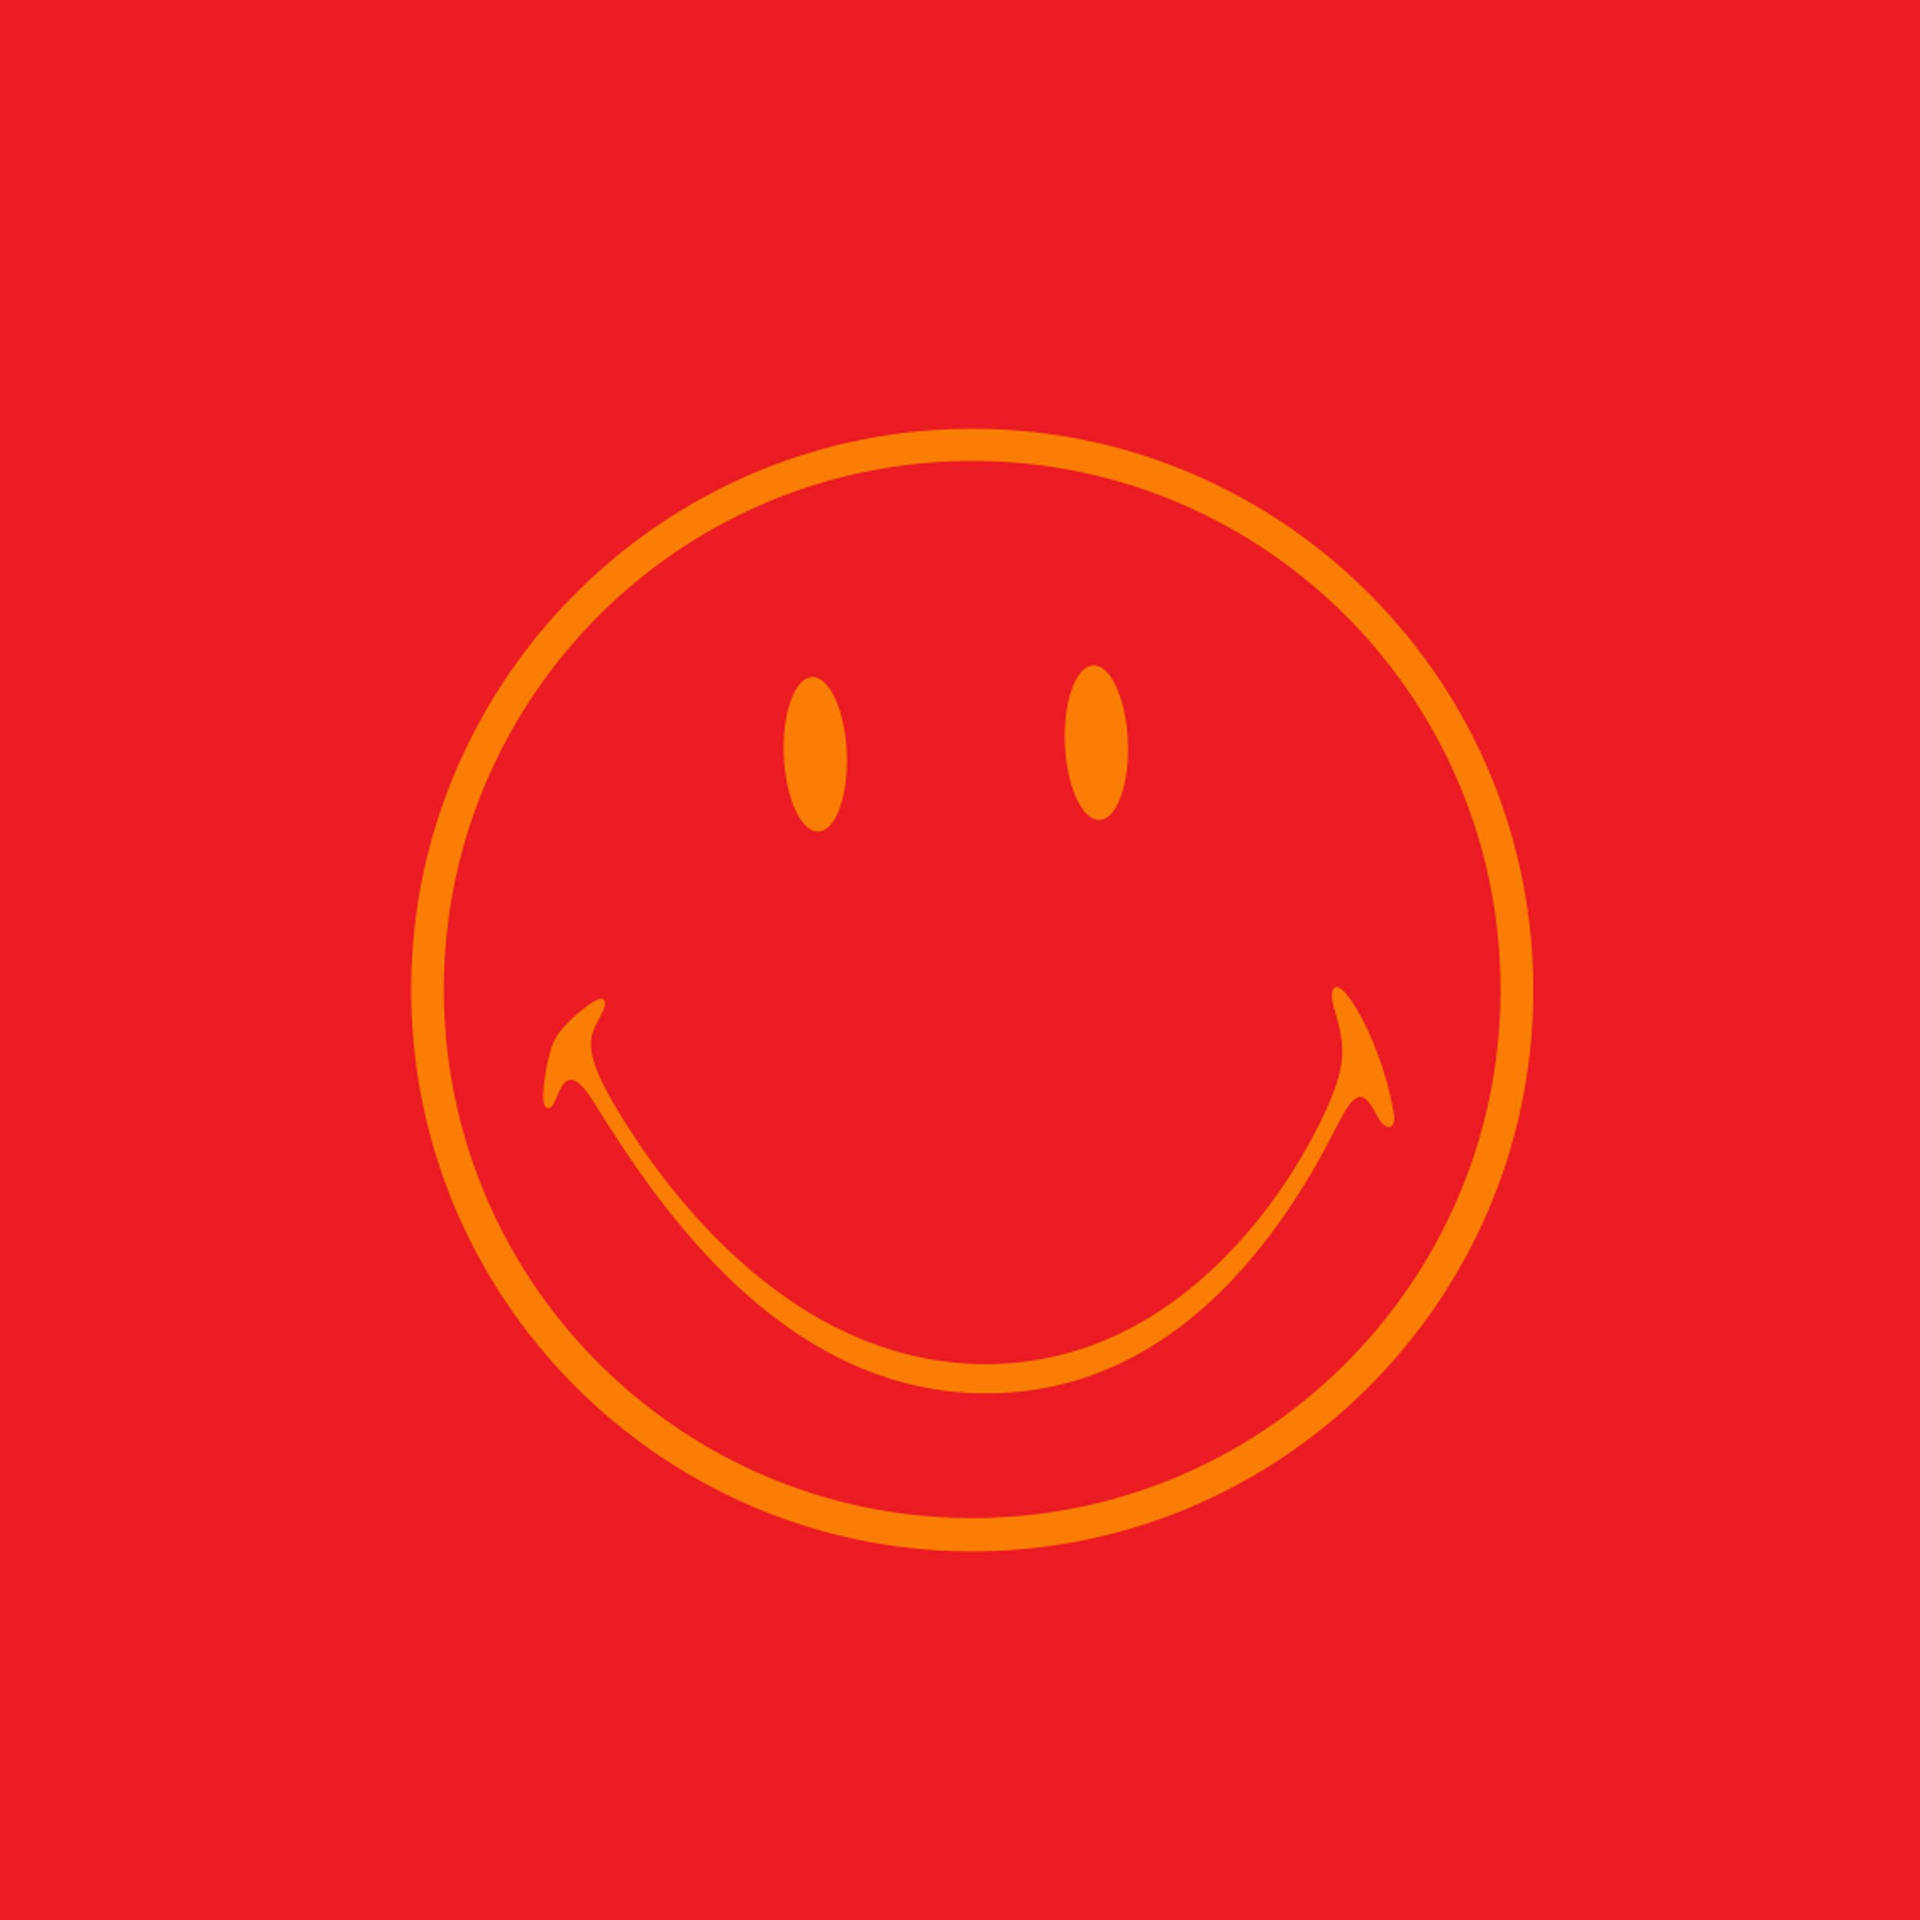 Preppy Smiley Face On Plain Red Background